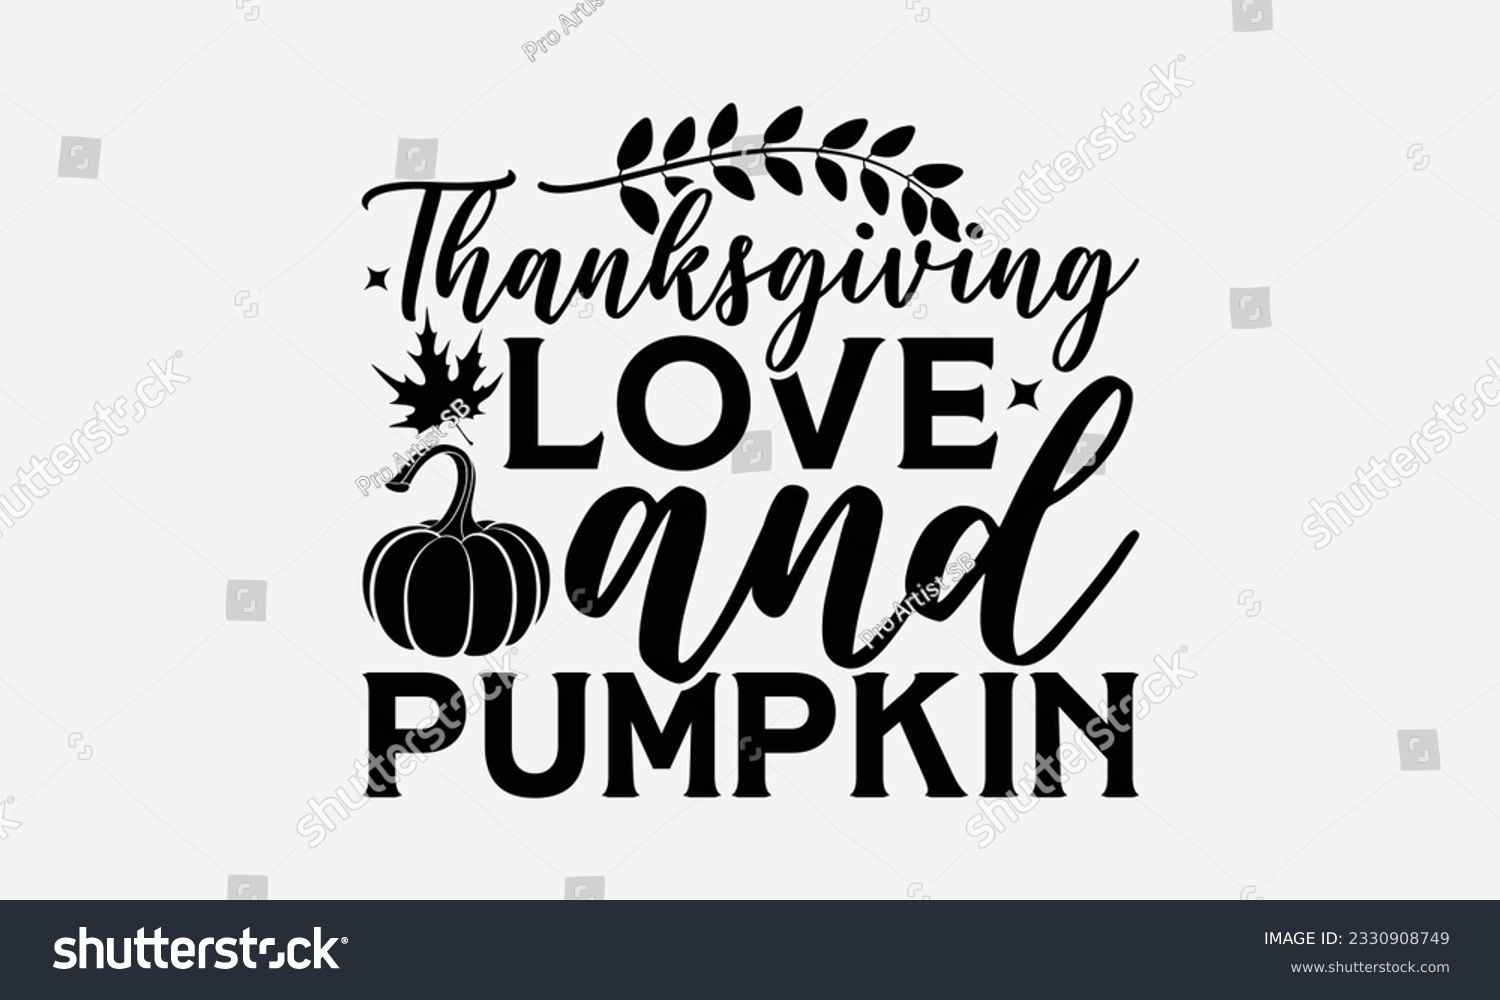 SVG of Thanksgiving Love And Pumpkin - Thanksgiving T-shirt Design Template, Thanksgiving Quotes File, Hand Drawn Lettering Phrase, SVG Files for Cutting Cricut and Silhouette svg